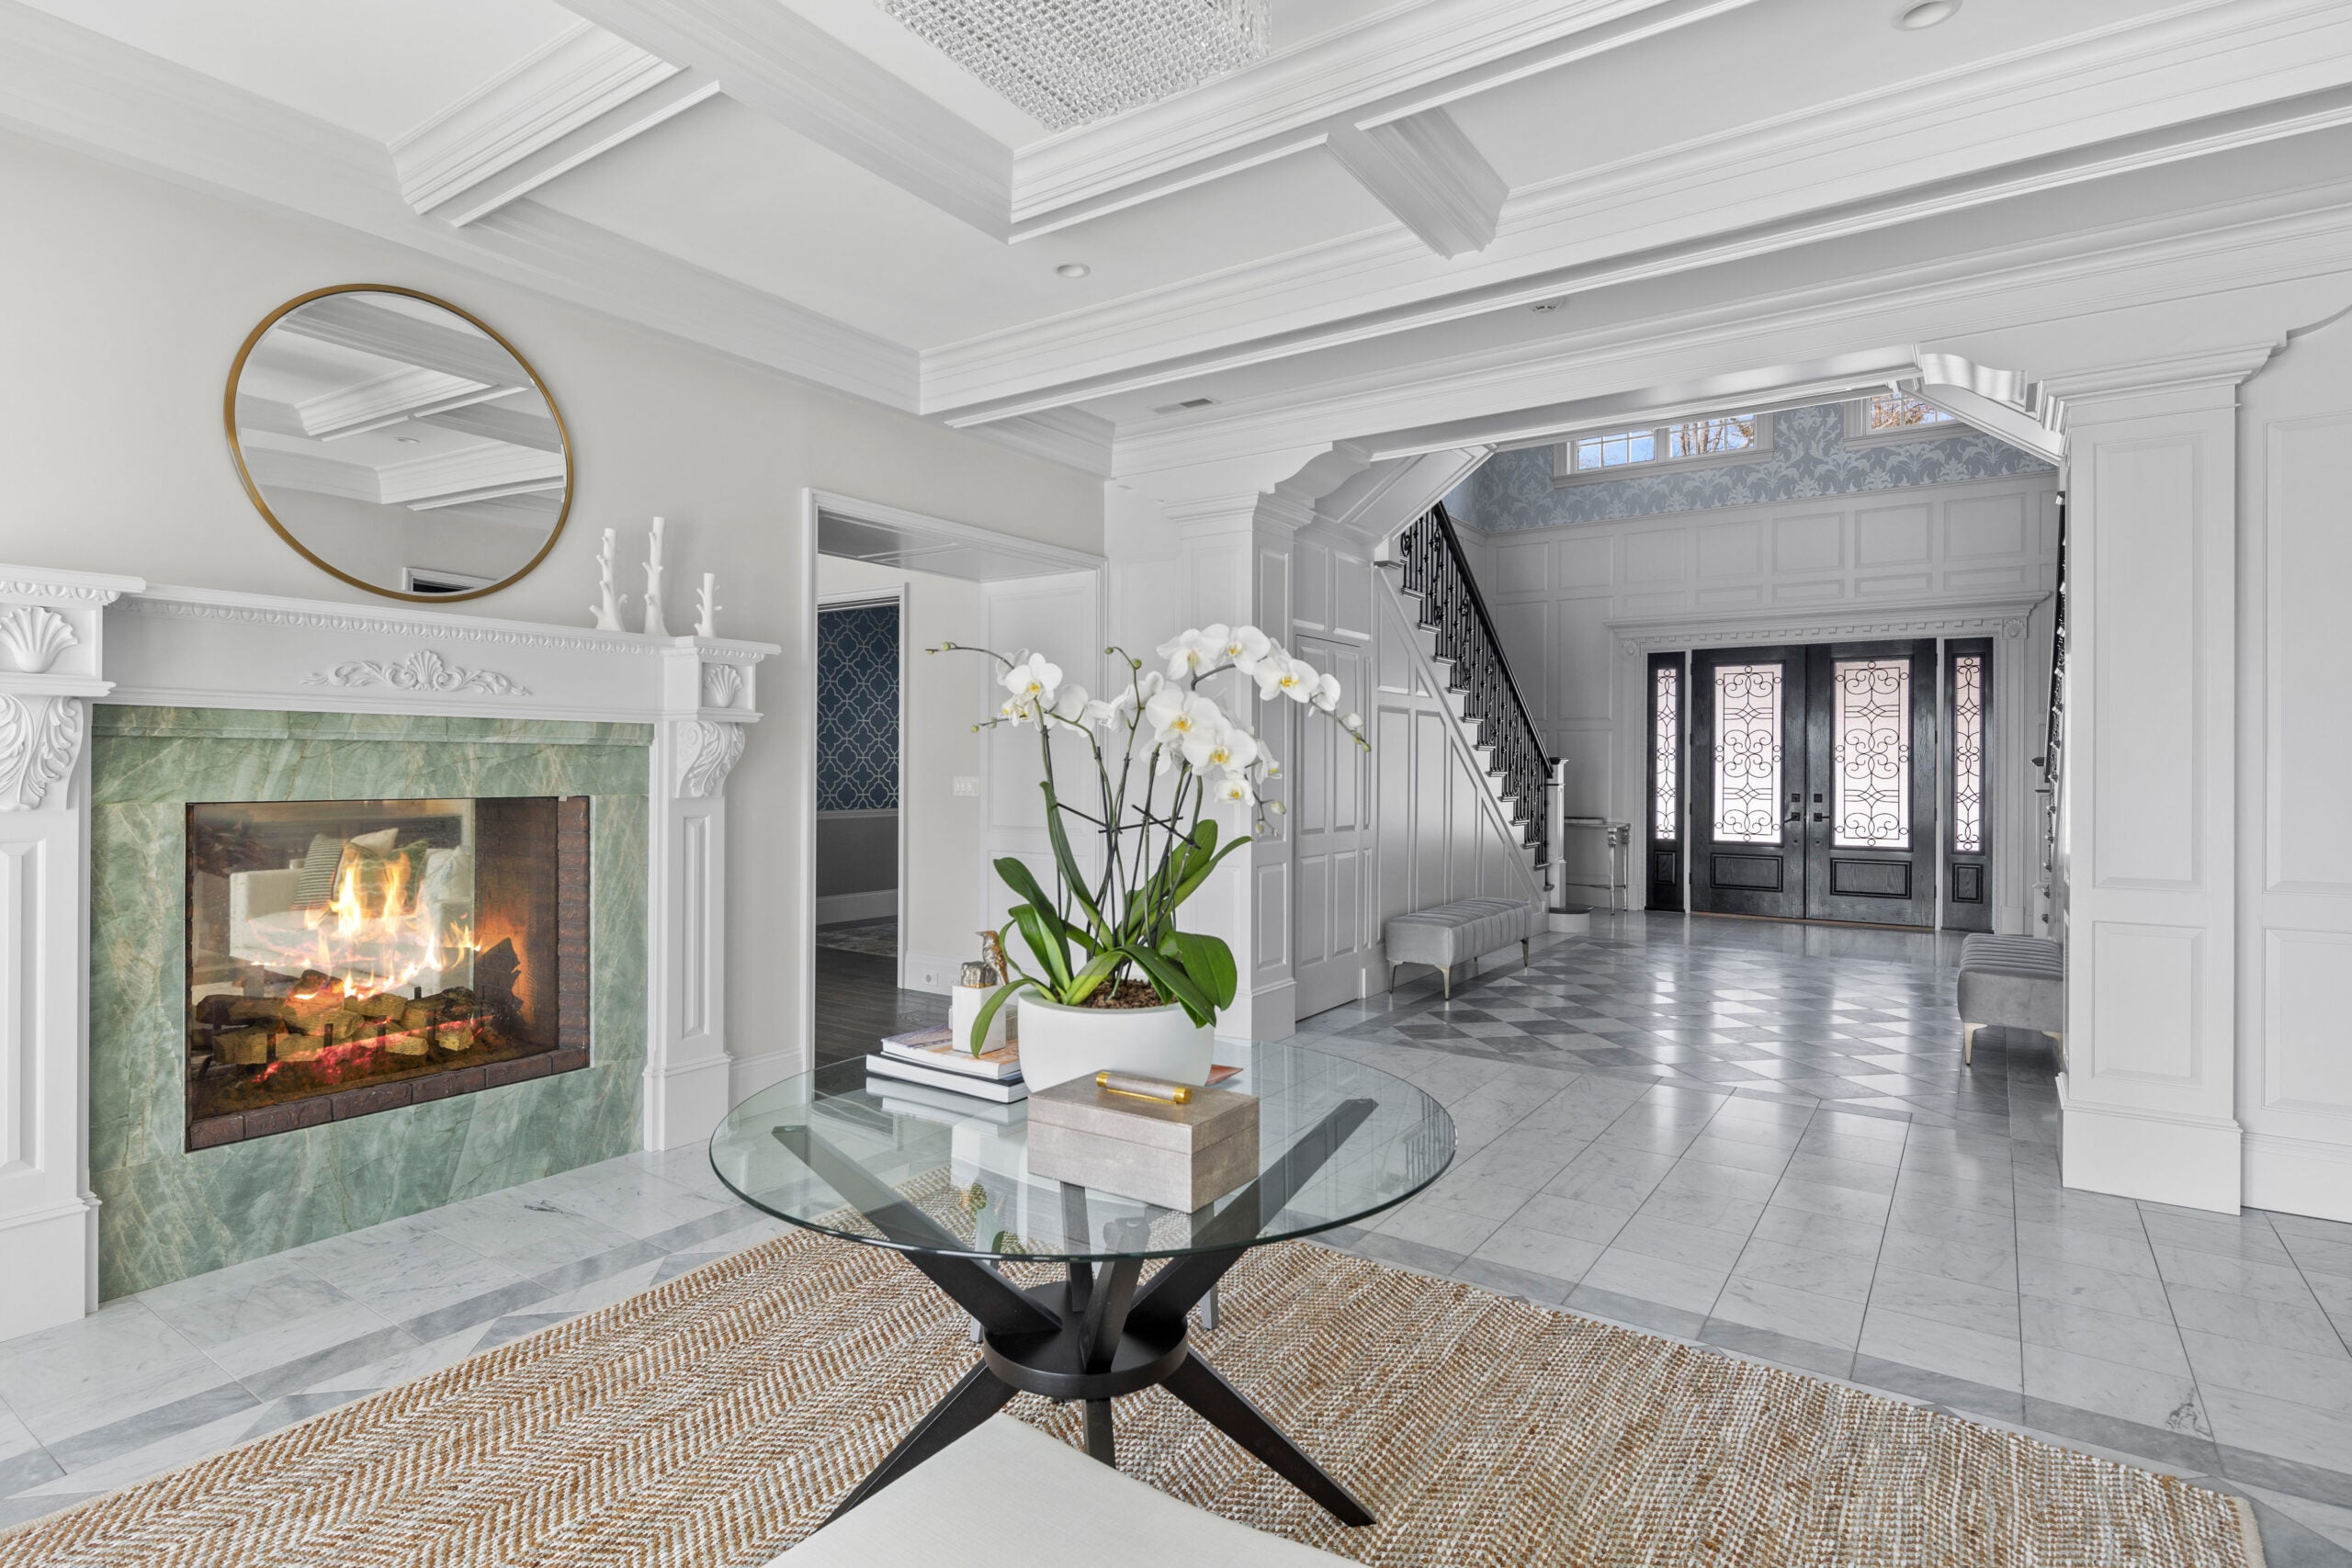 This gas fireplace is one of three inside this 10,000-square-foot home.